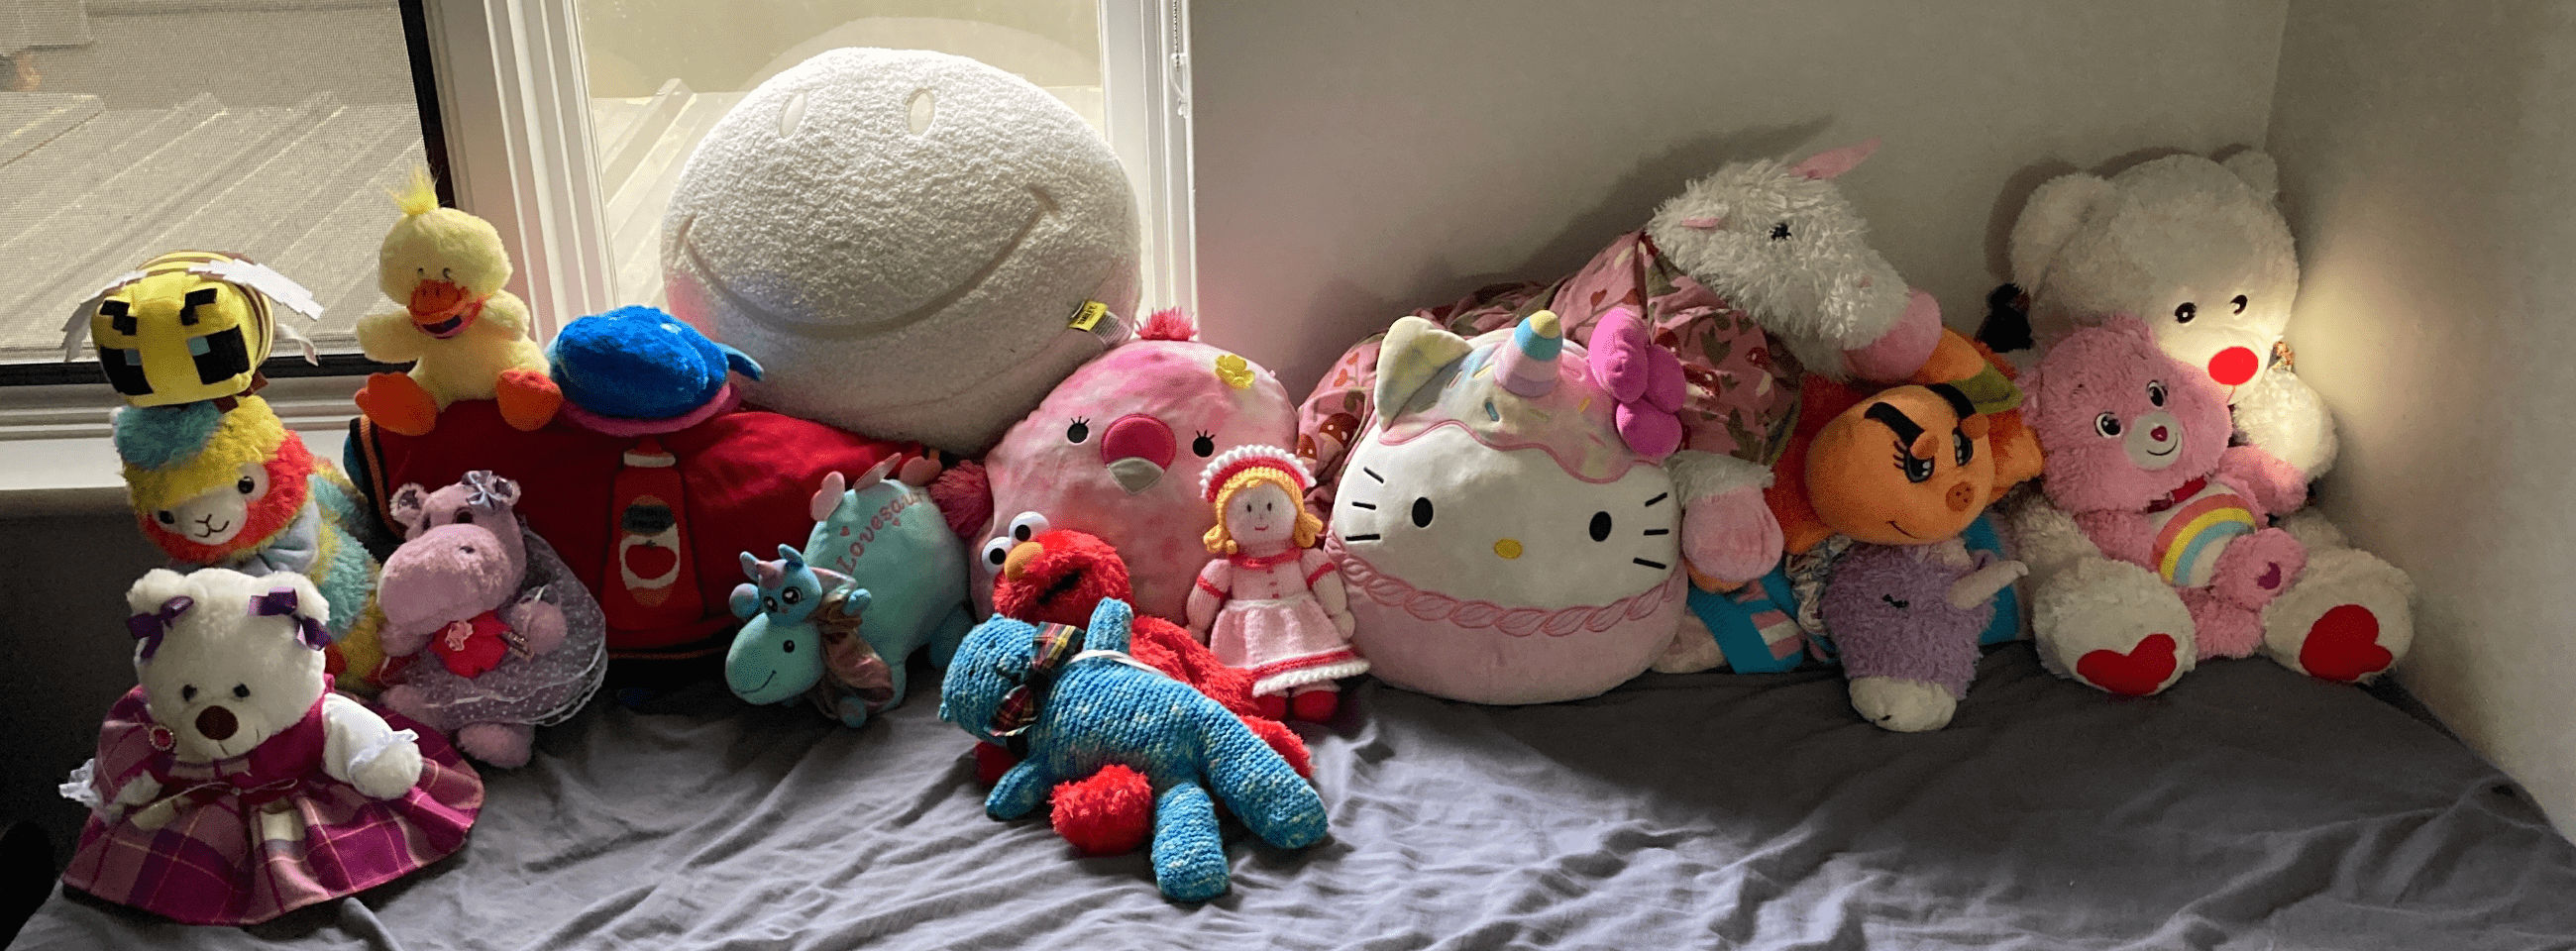 All of SlinkyFam's plushies laid out on bed in daylight